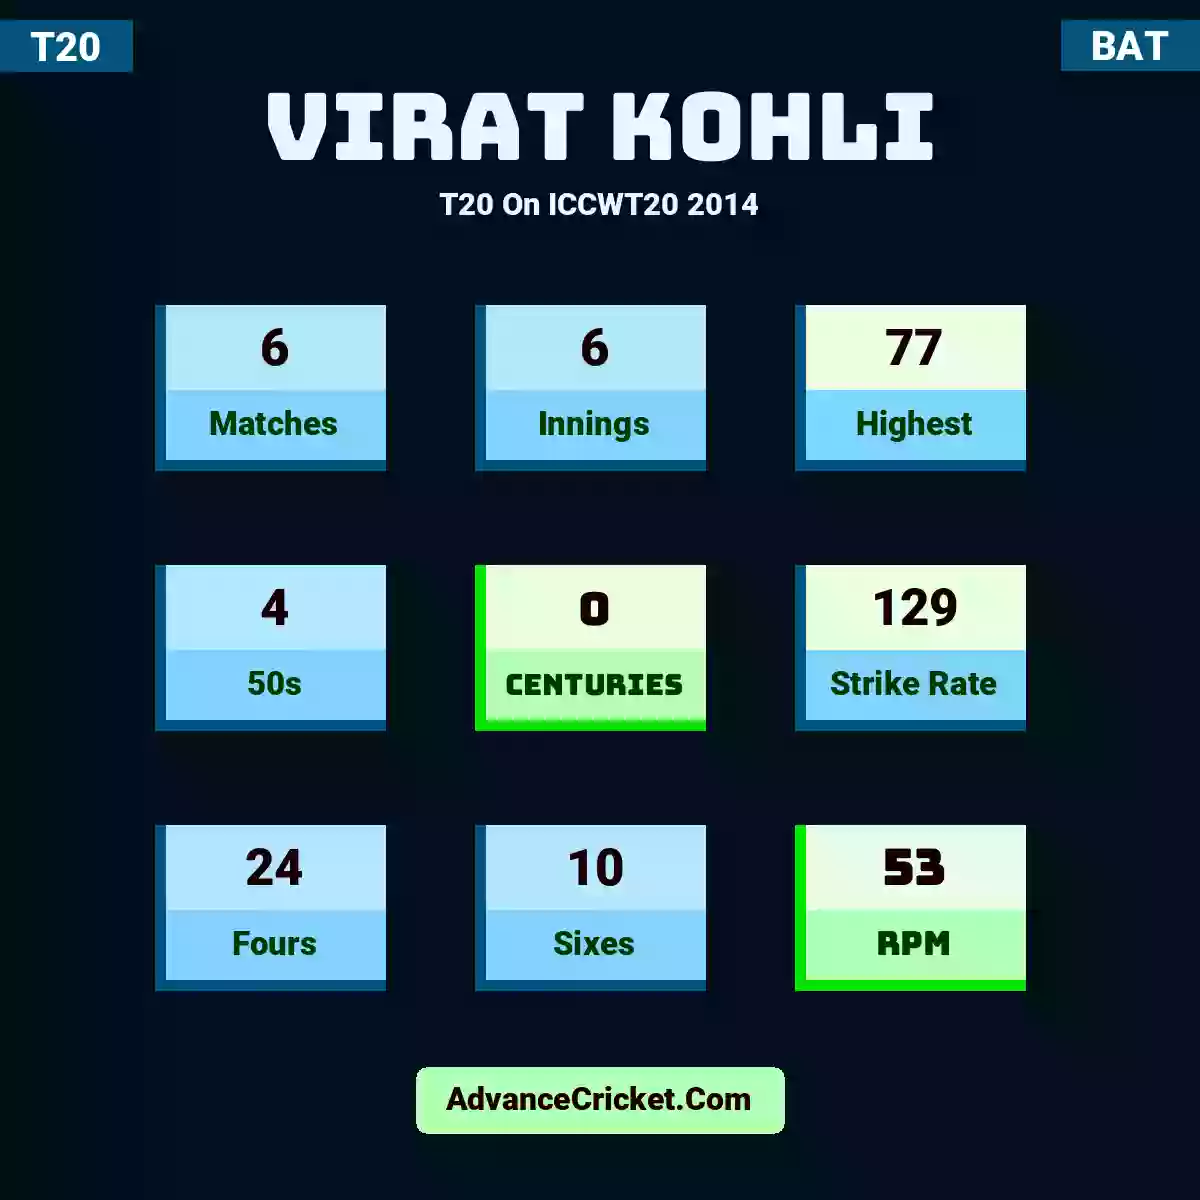 Virat Kohli T20  On ICCWT20 2014, Virat Kohli played 6 matches, scored 77 runs as highest, 4 half-centuries, and 0 centuries, with a strike rate of 129. V.Kohli hit 24 fours and 10 sixes, with an RPM of 53.